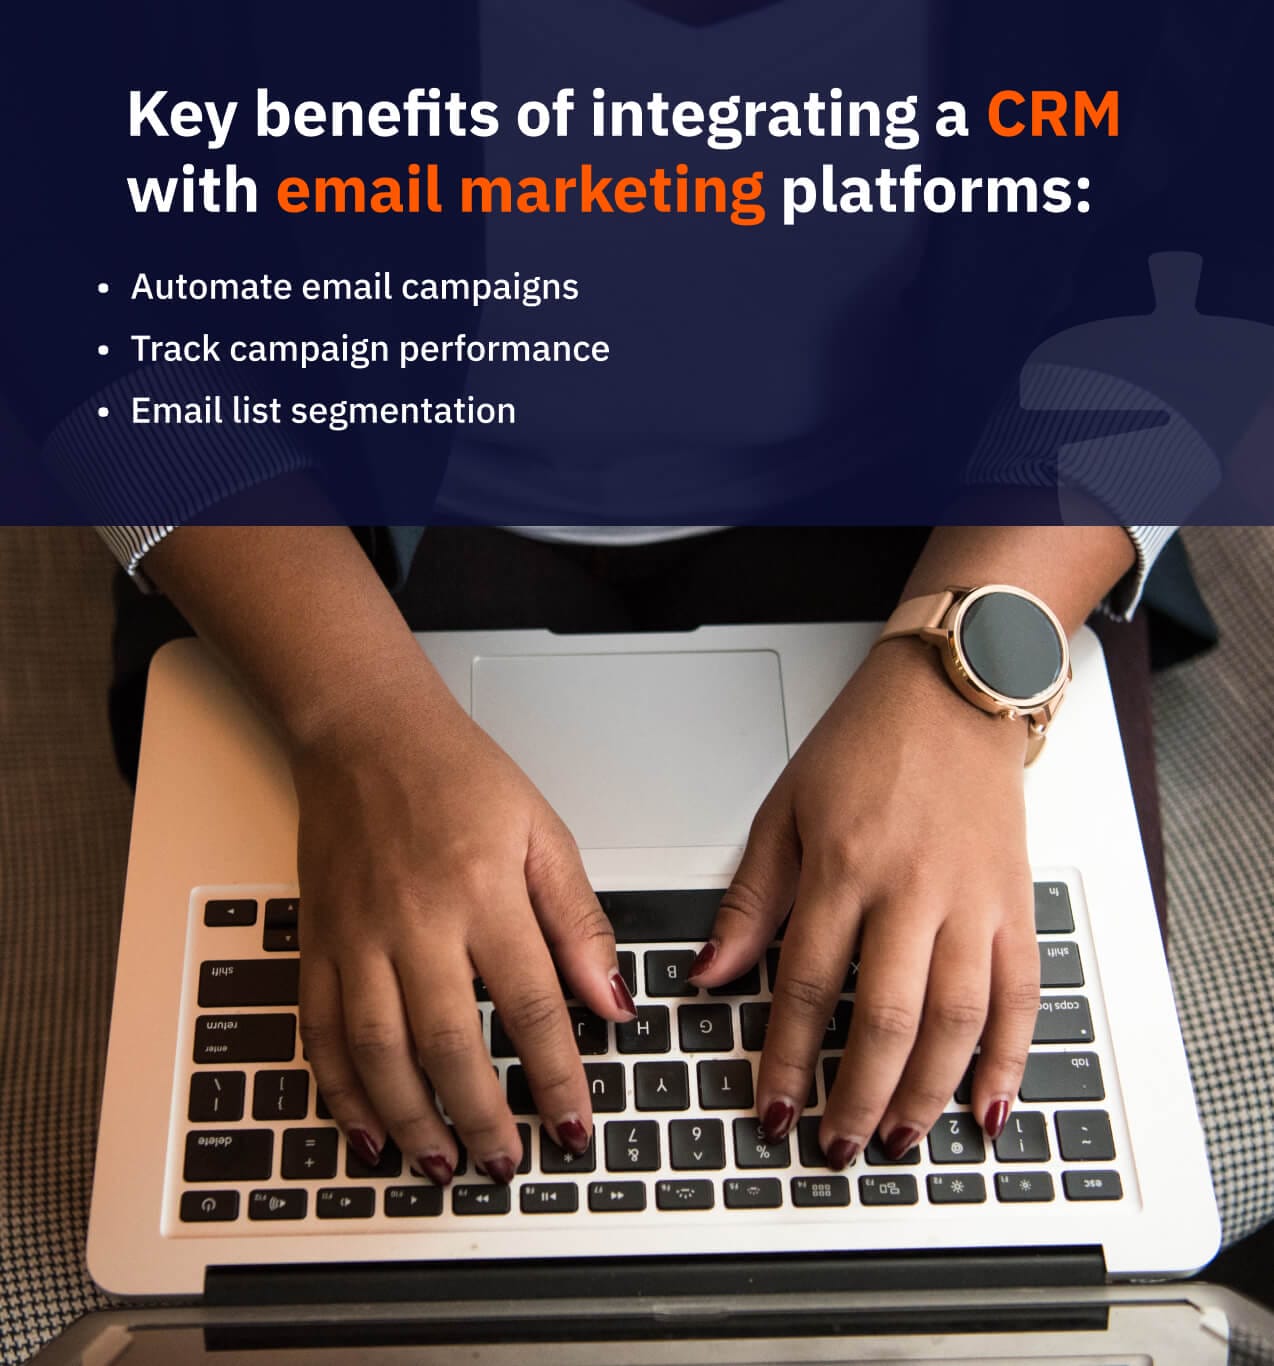 Integrating a CRM with email marketing platforms